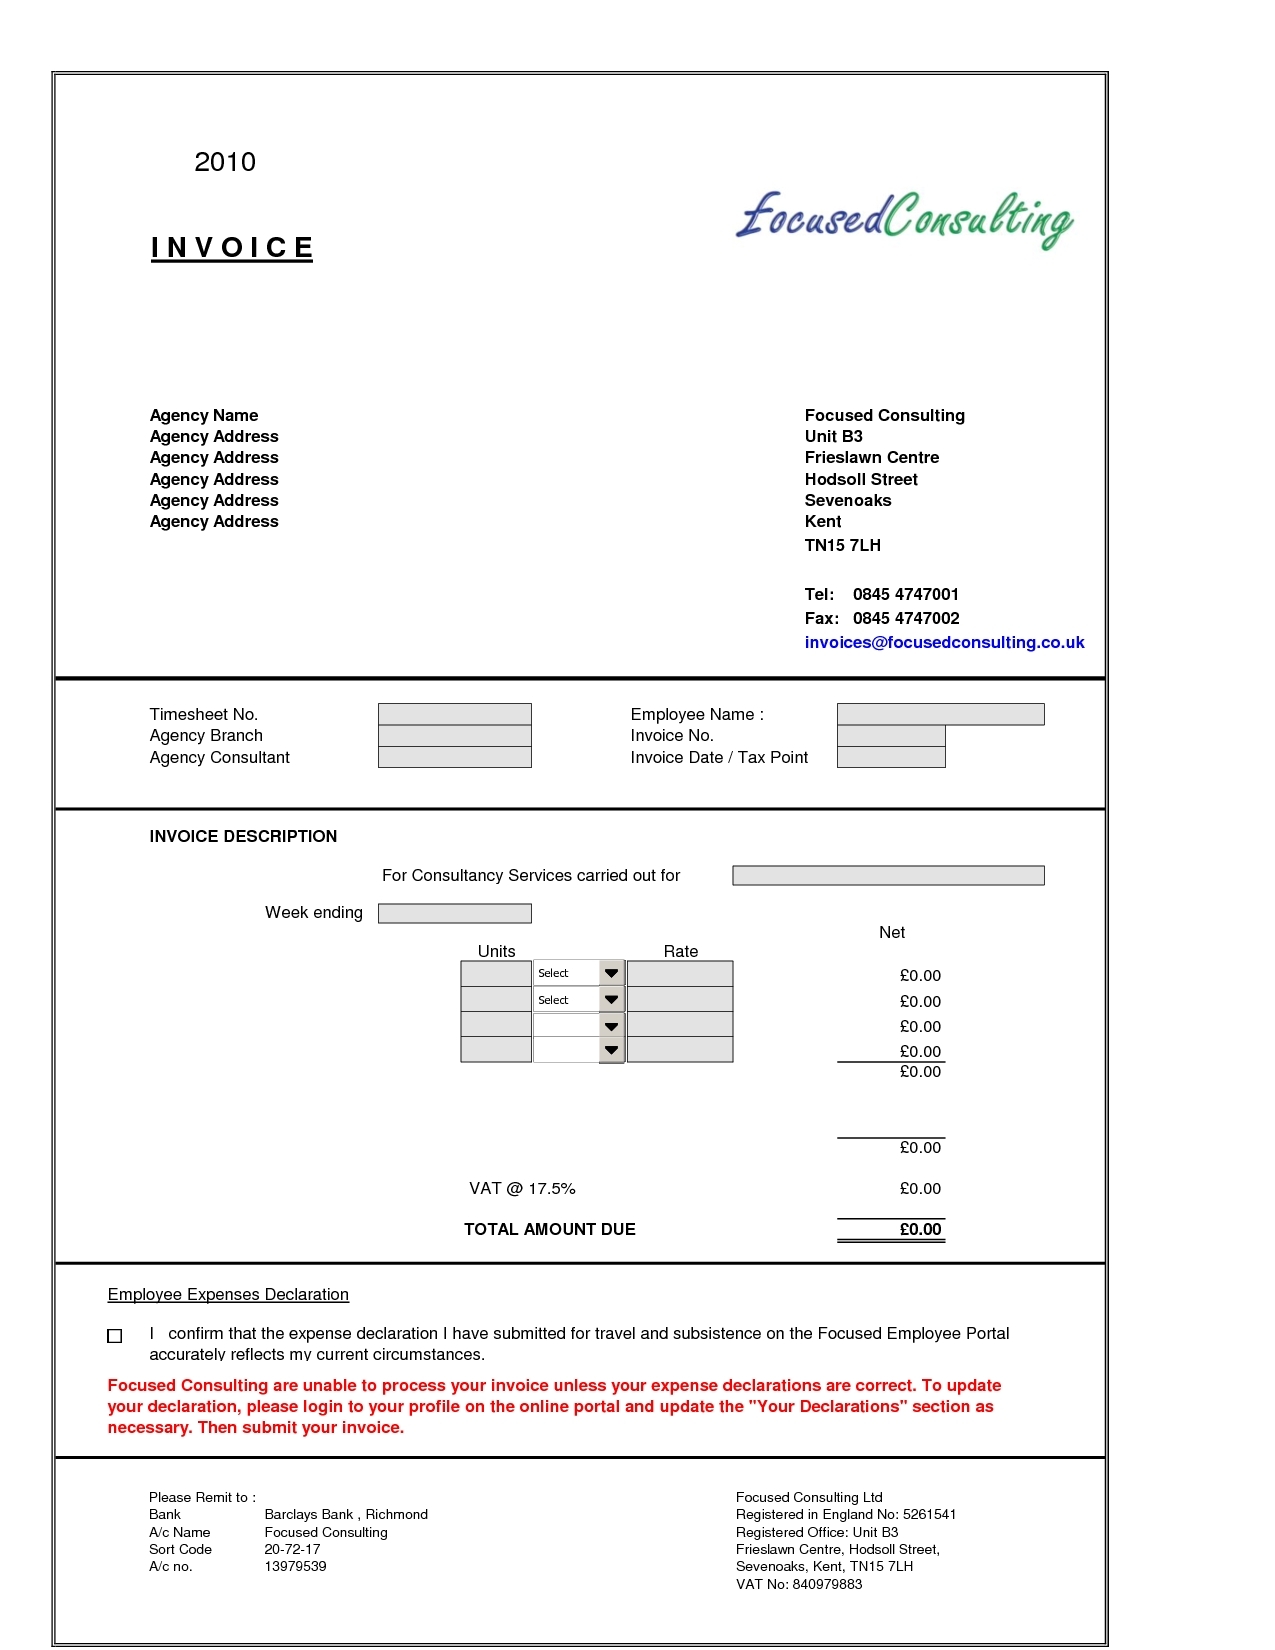 Sample Invoices For Consulting Services * Invoice Template Ideas